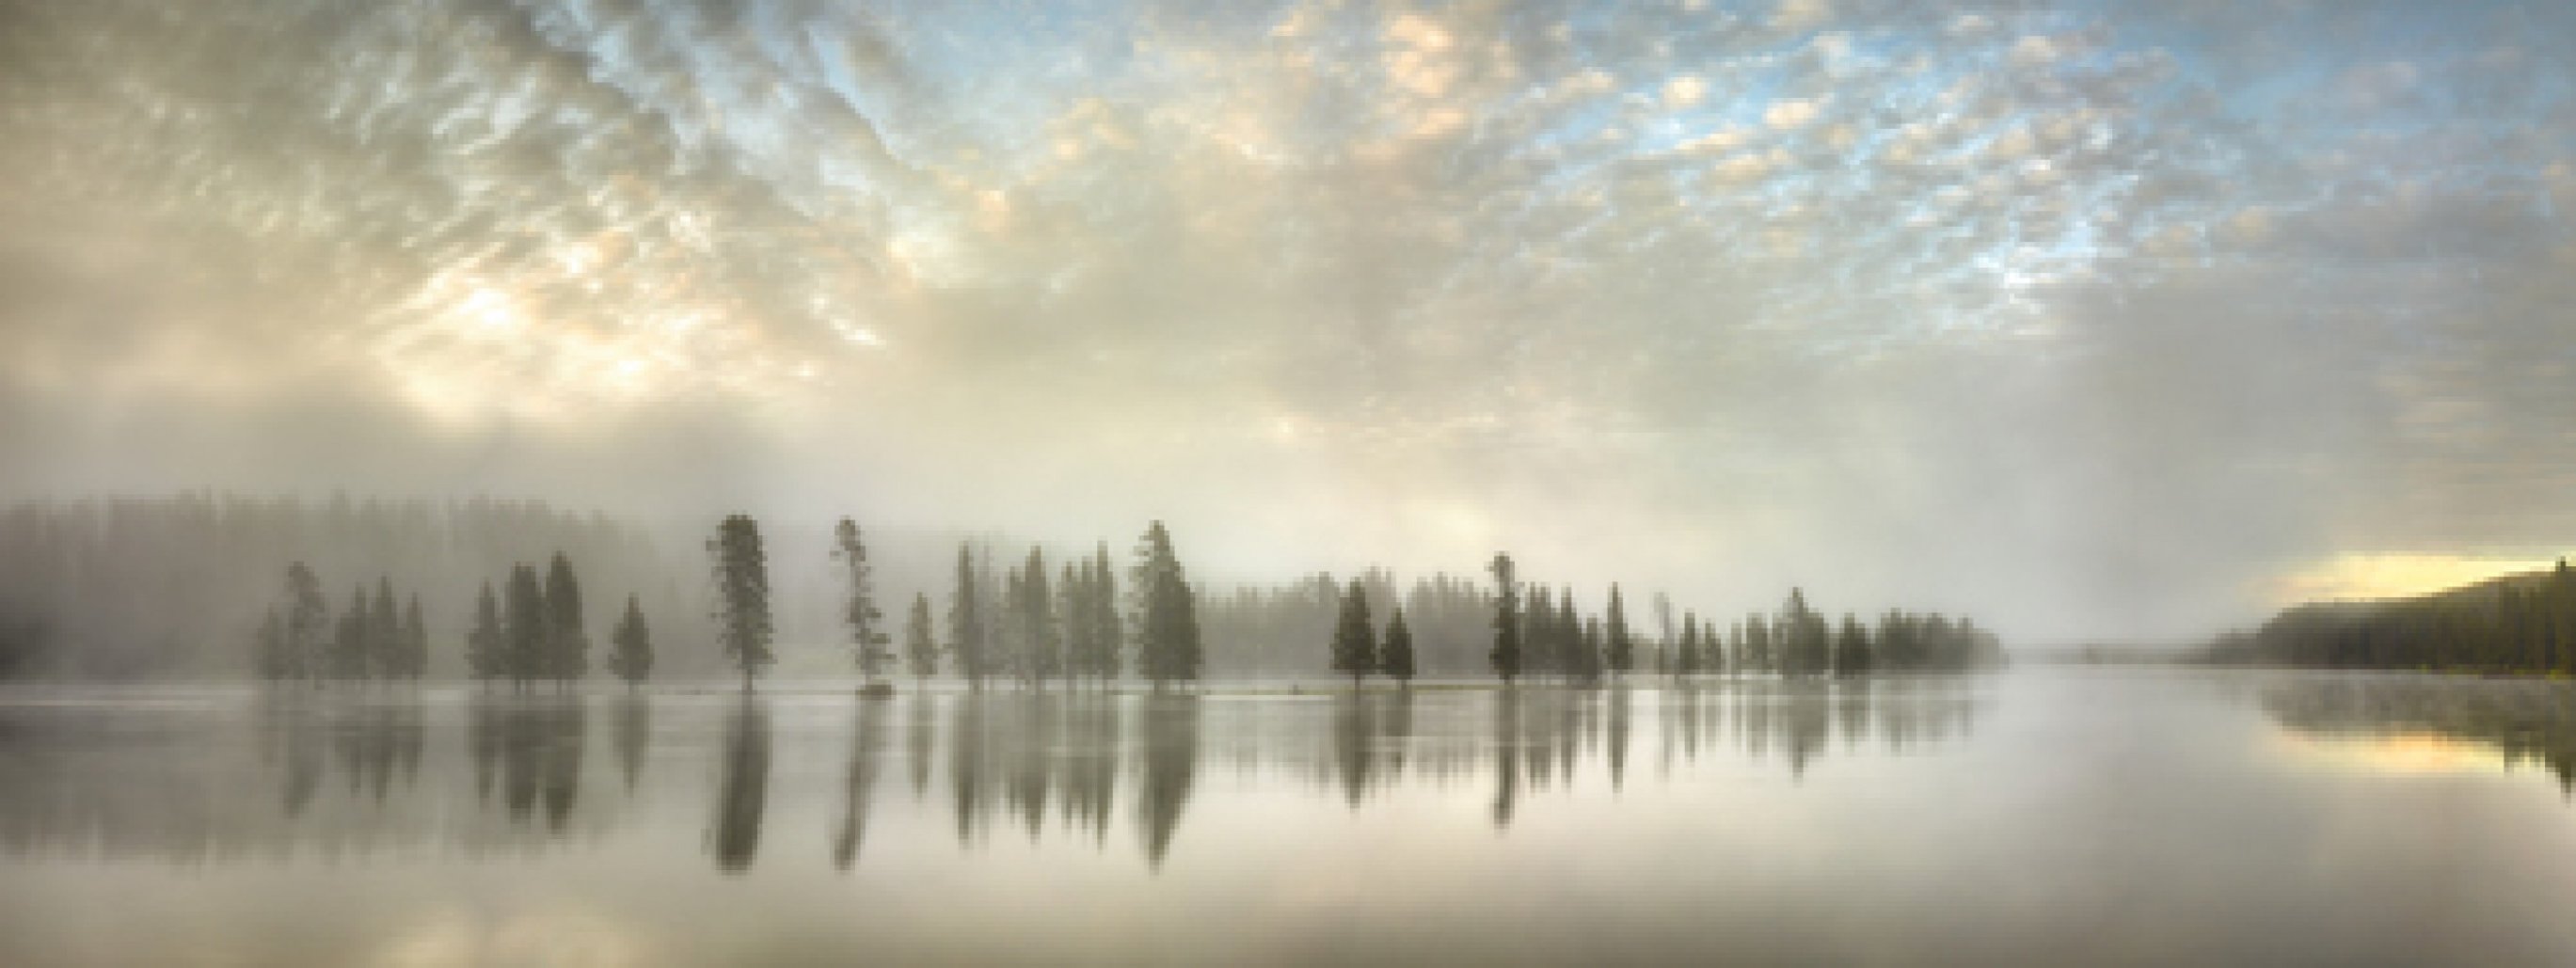 River of Silence, Yellowstone National Park  Wyoming, USA 2011 Panorama by Rodney Lough, Jr. 